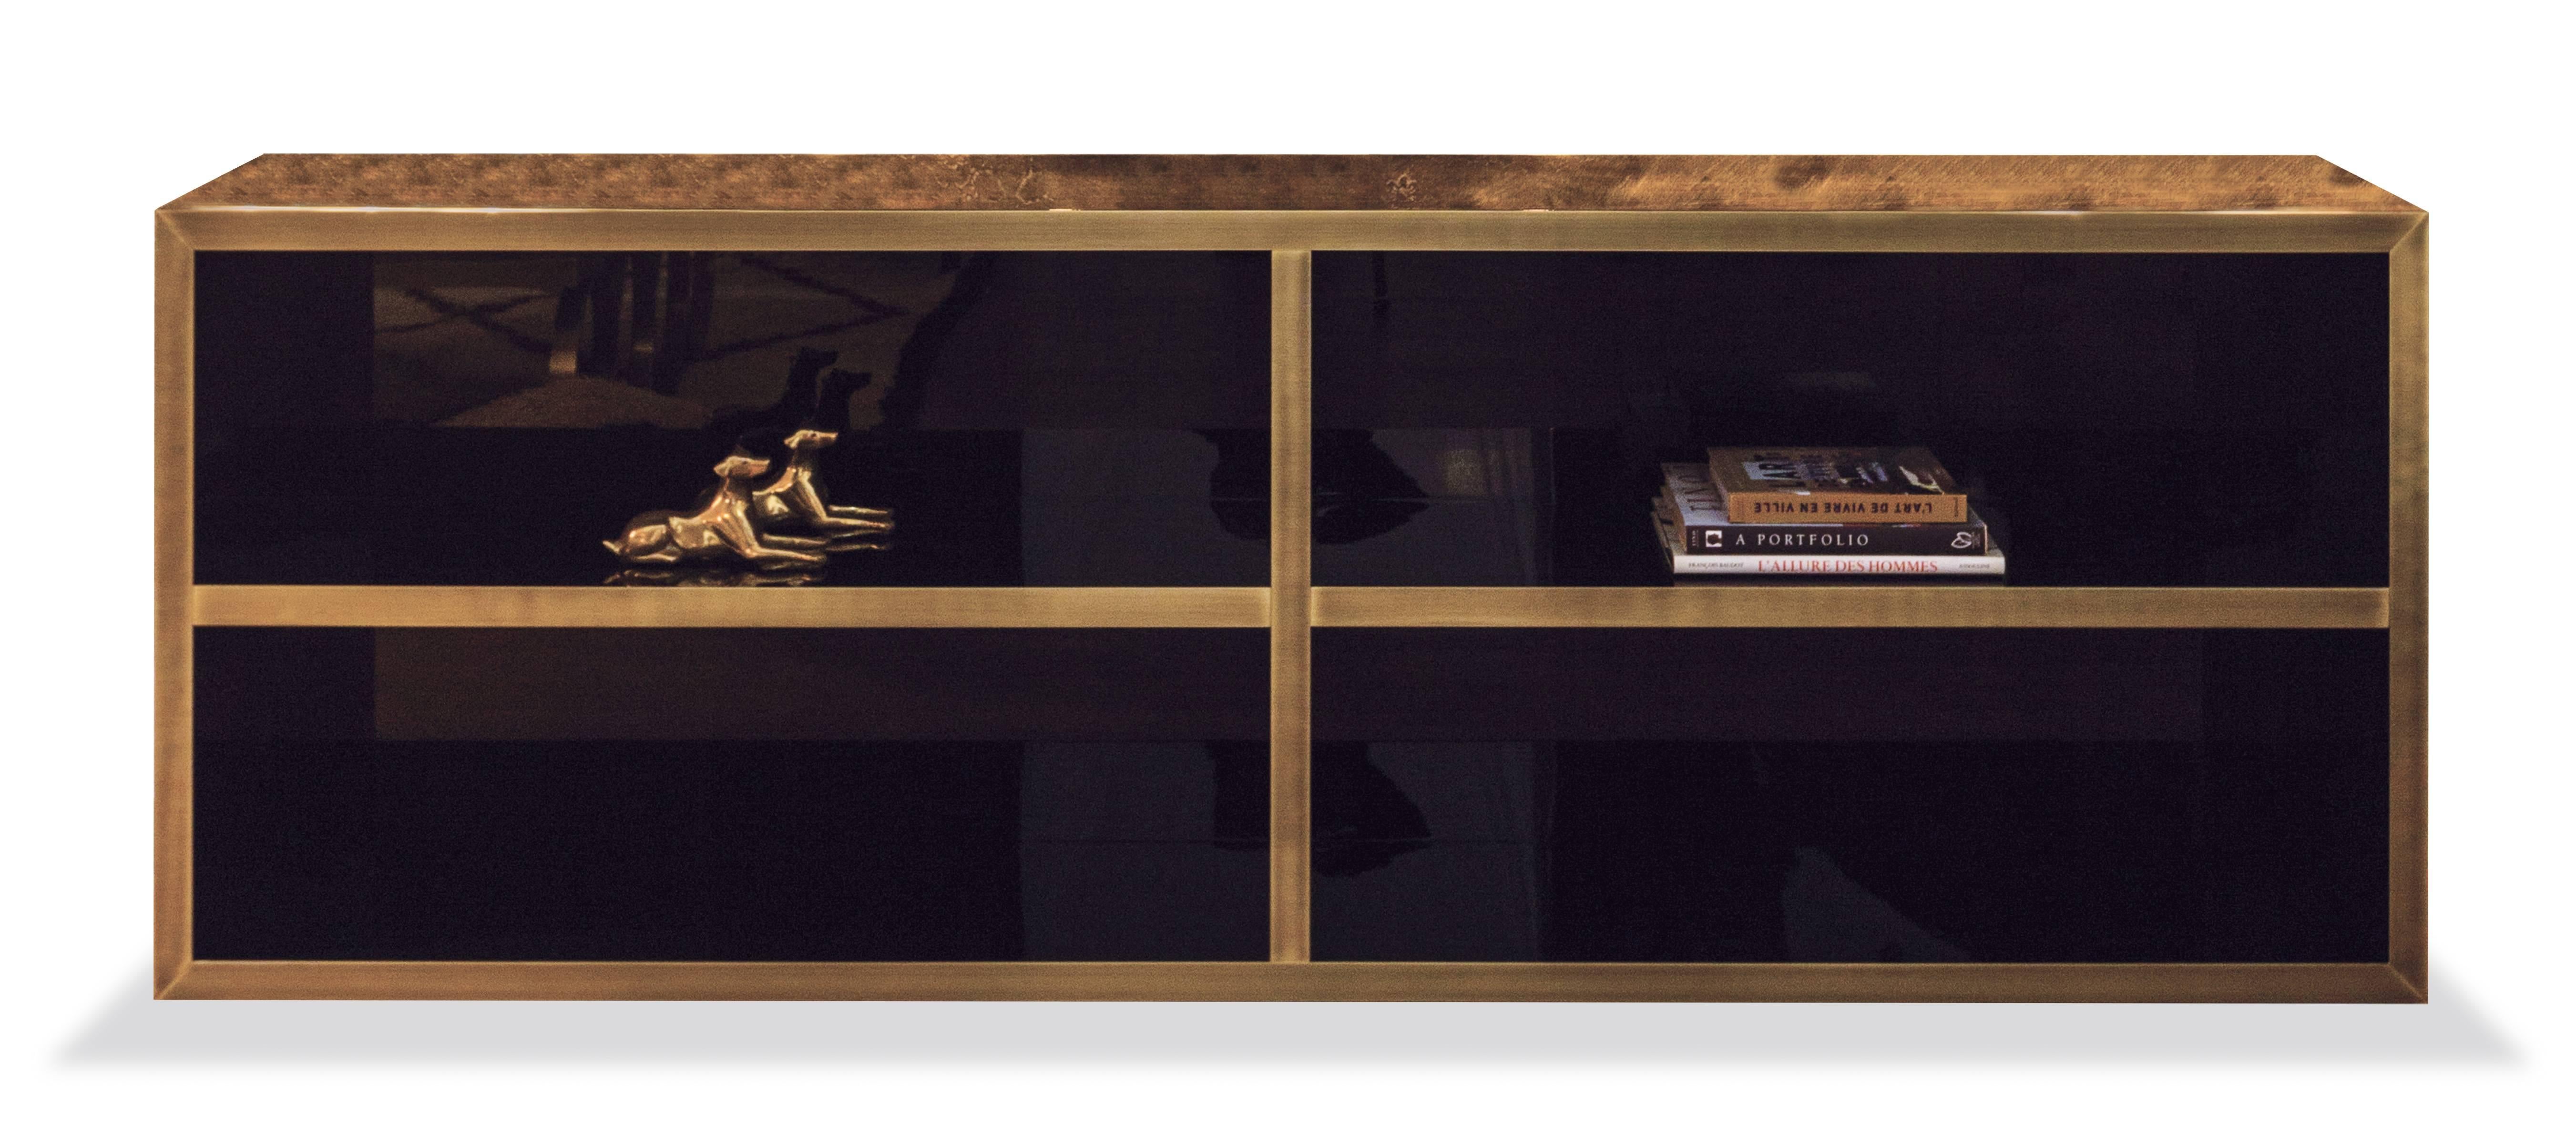 Simple but elegant and functional brass fronted single or double access bookcase with beautiful Makassar ebony veneer.

Measures: cm. 230 x 40 x 76 H.

(Pic 1): Double-sided bookcase:
Semi gloss Makassar ebony veneered.
Metal outlines: Gloss